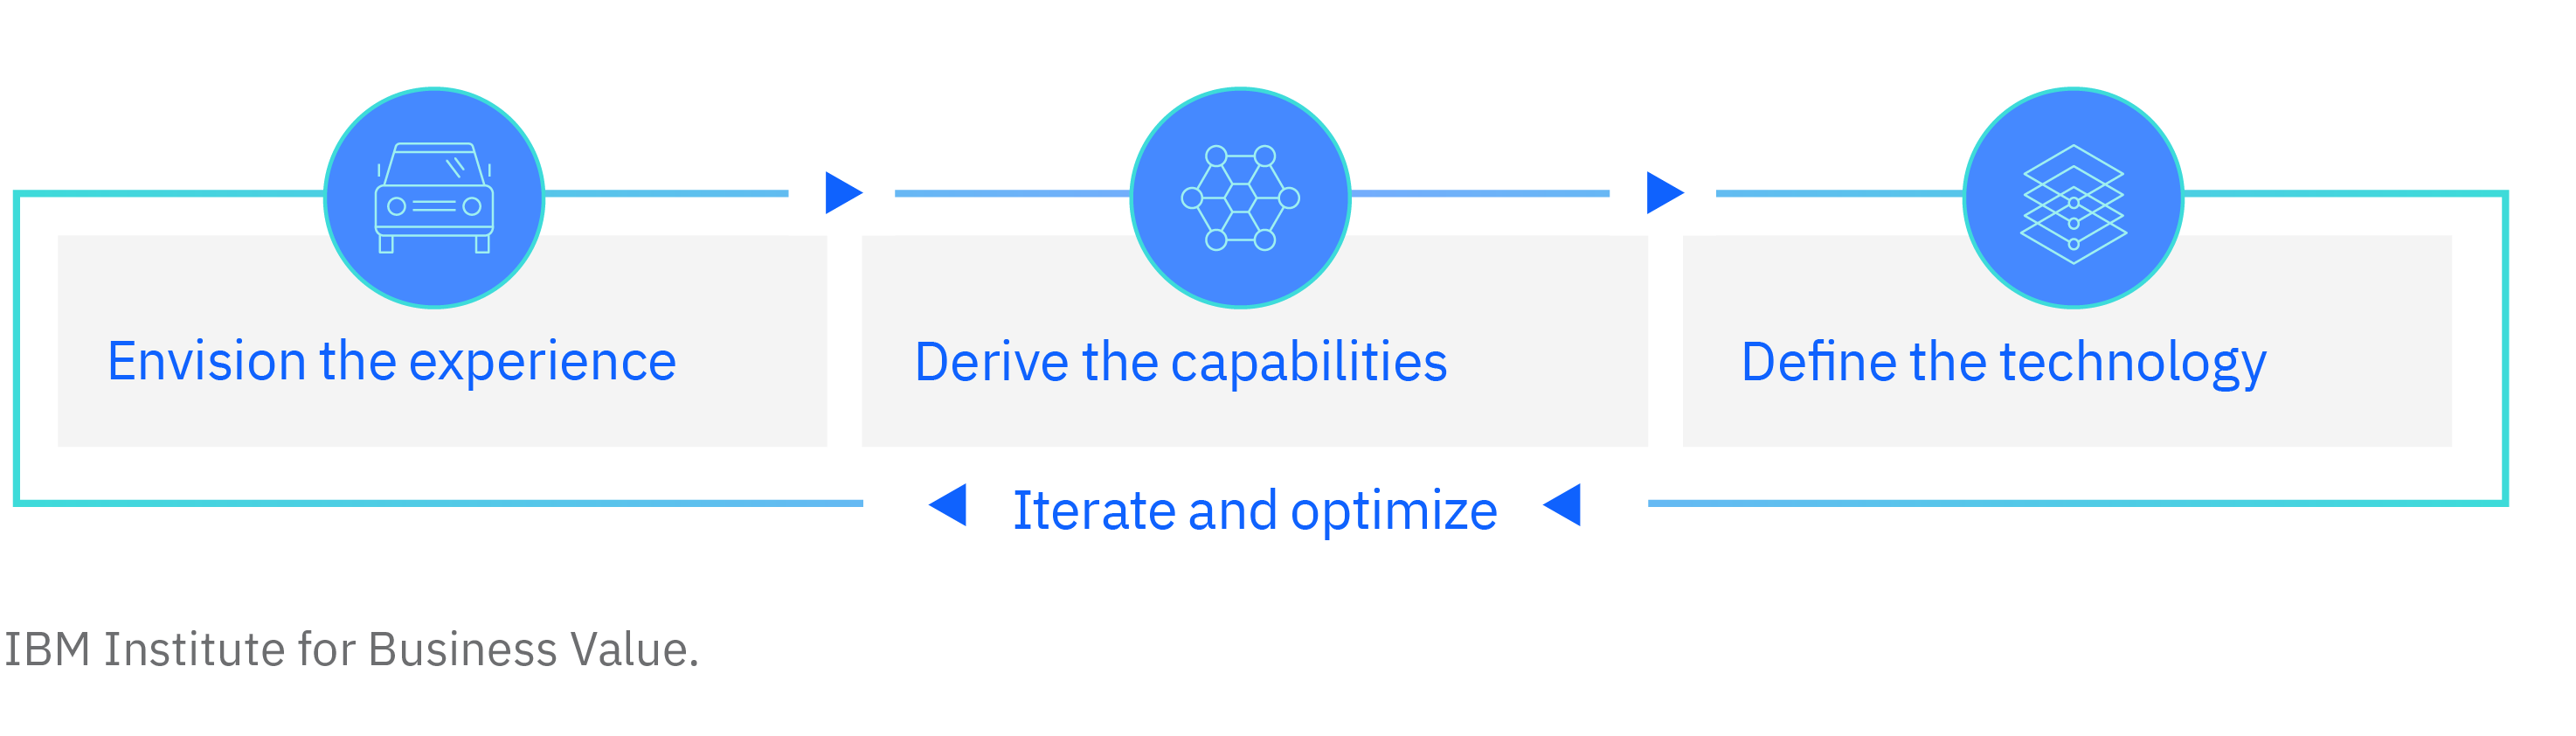 Envision the experience. Derive the capabilities. Define the technology. Iterate and optimize.